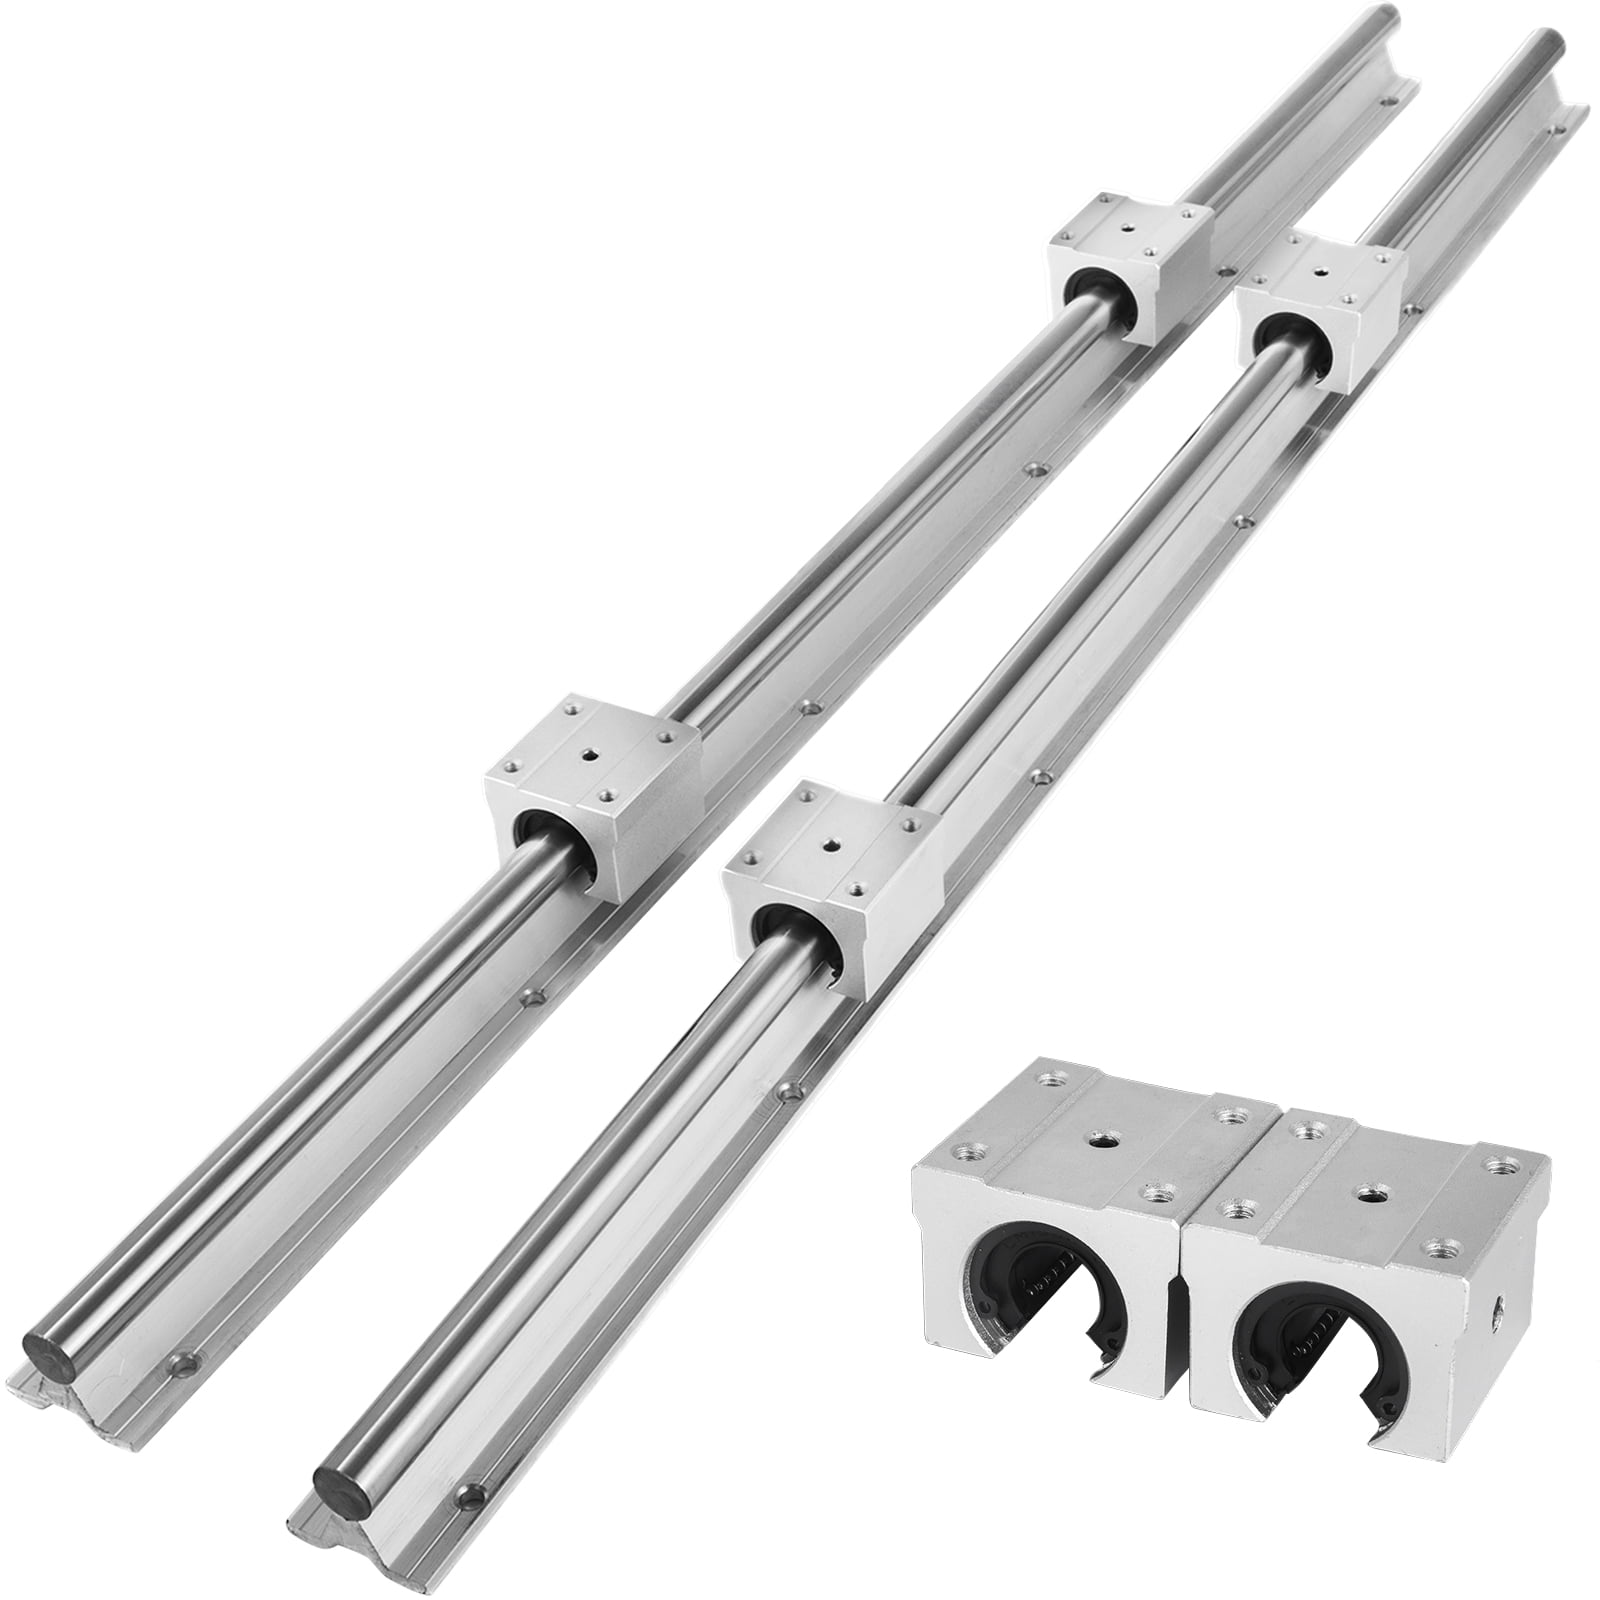 Details about   Mini MGN12H Extension Guide Rail Sliding Block for Linear Sliding Device 